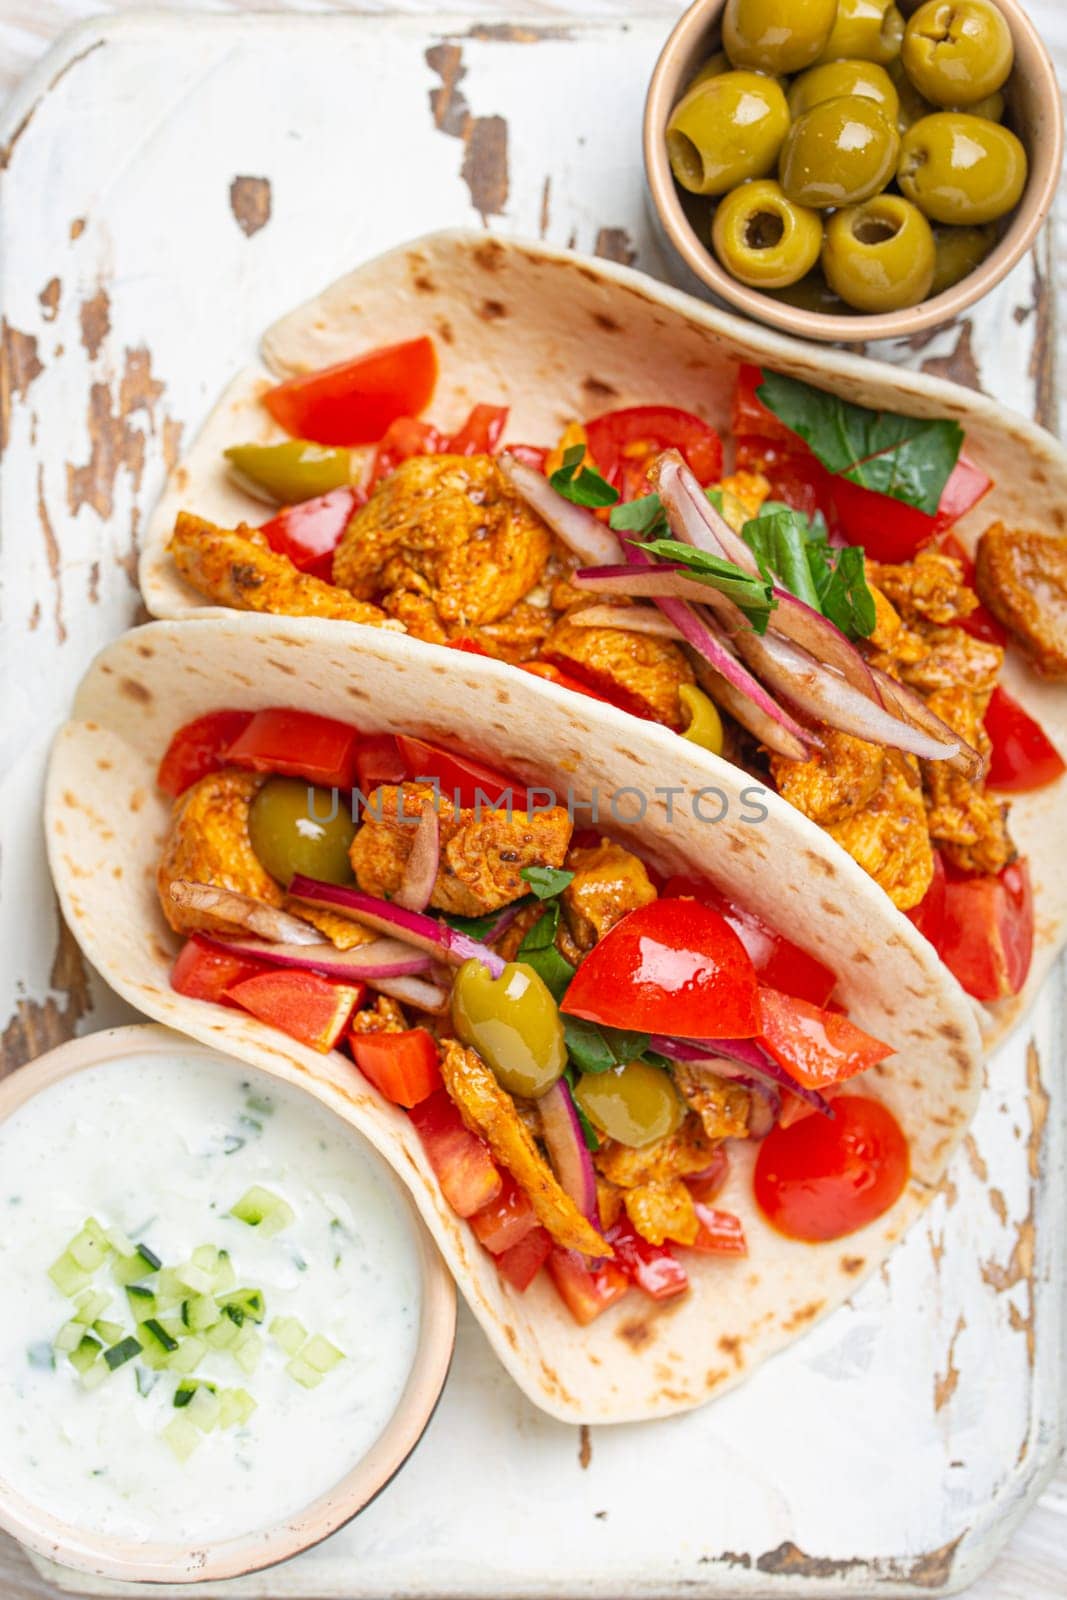 Traditional Greek Dish Gyros: Pita bread Wraps with vegetables, meat, herbs, olives on rustic wooden cutting board with Tzatziki sauce, olive oil top view, white wooden background, closeup.